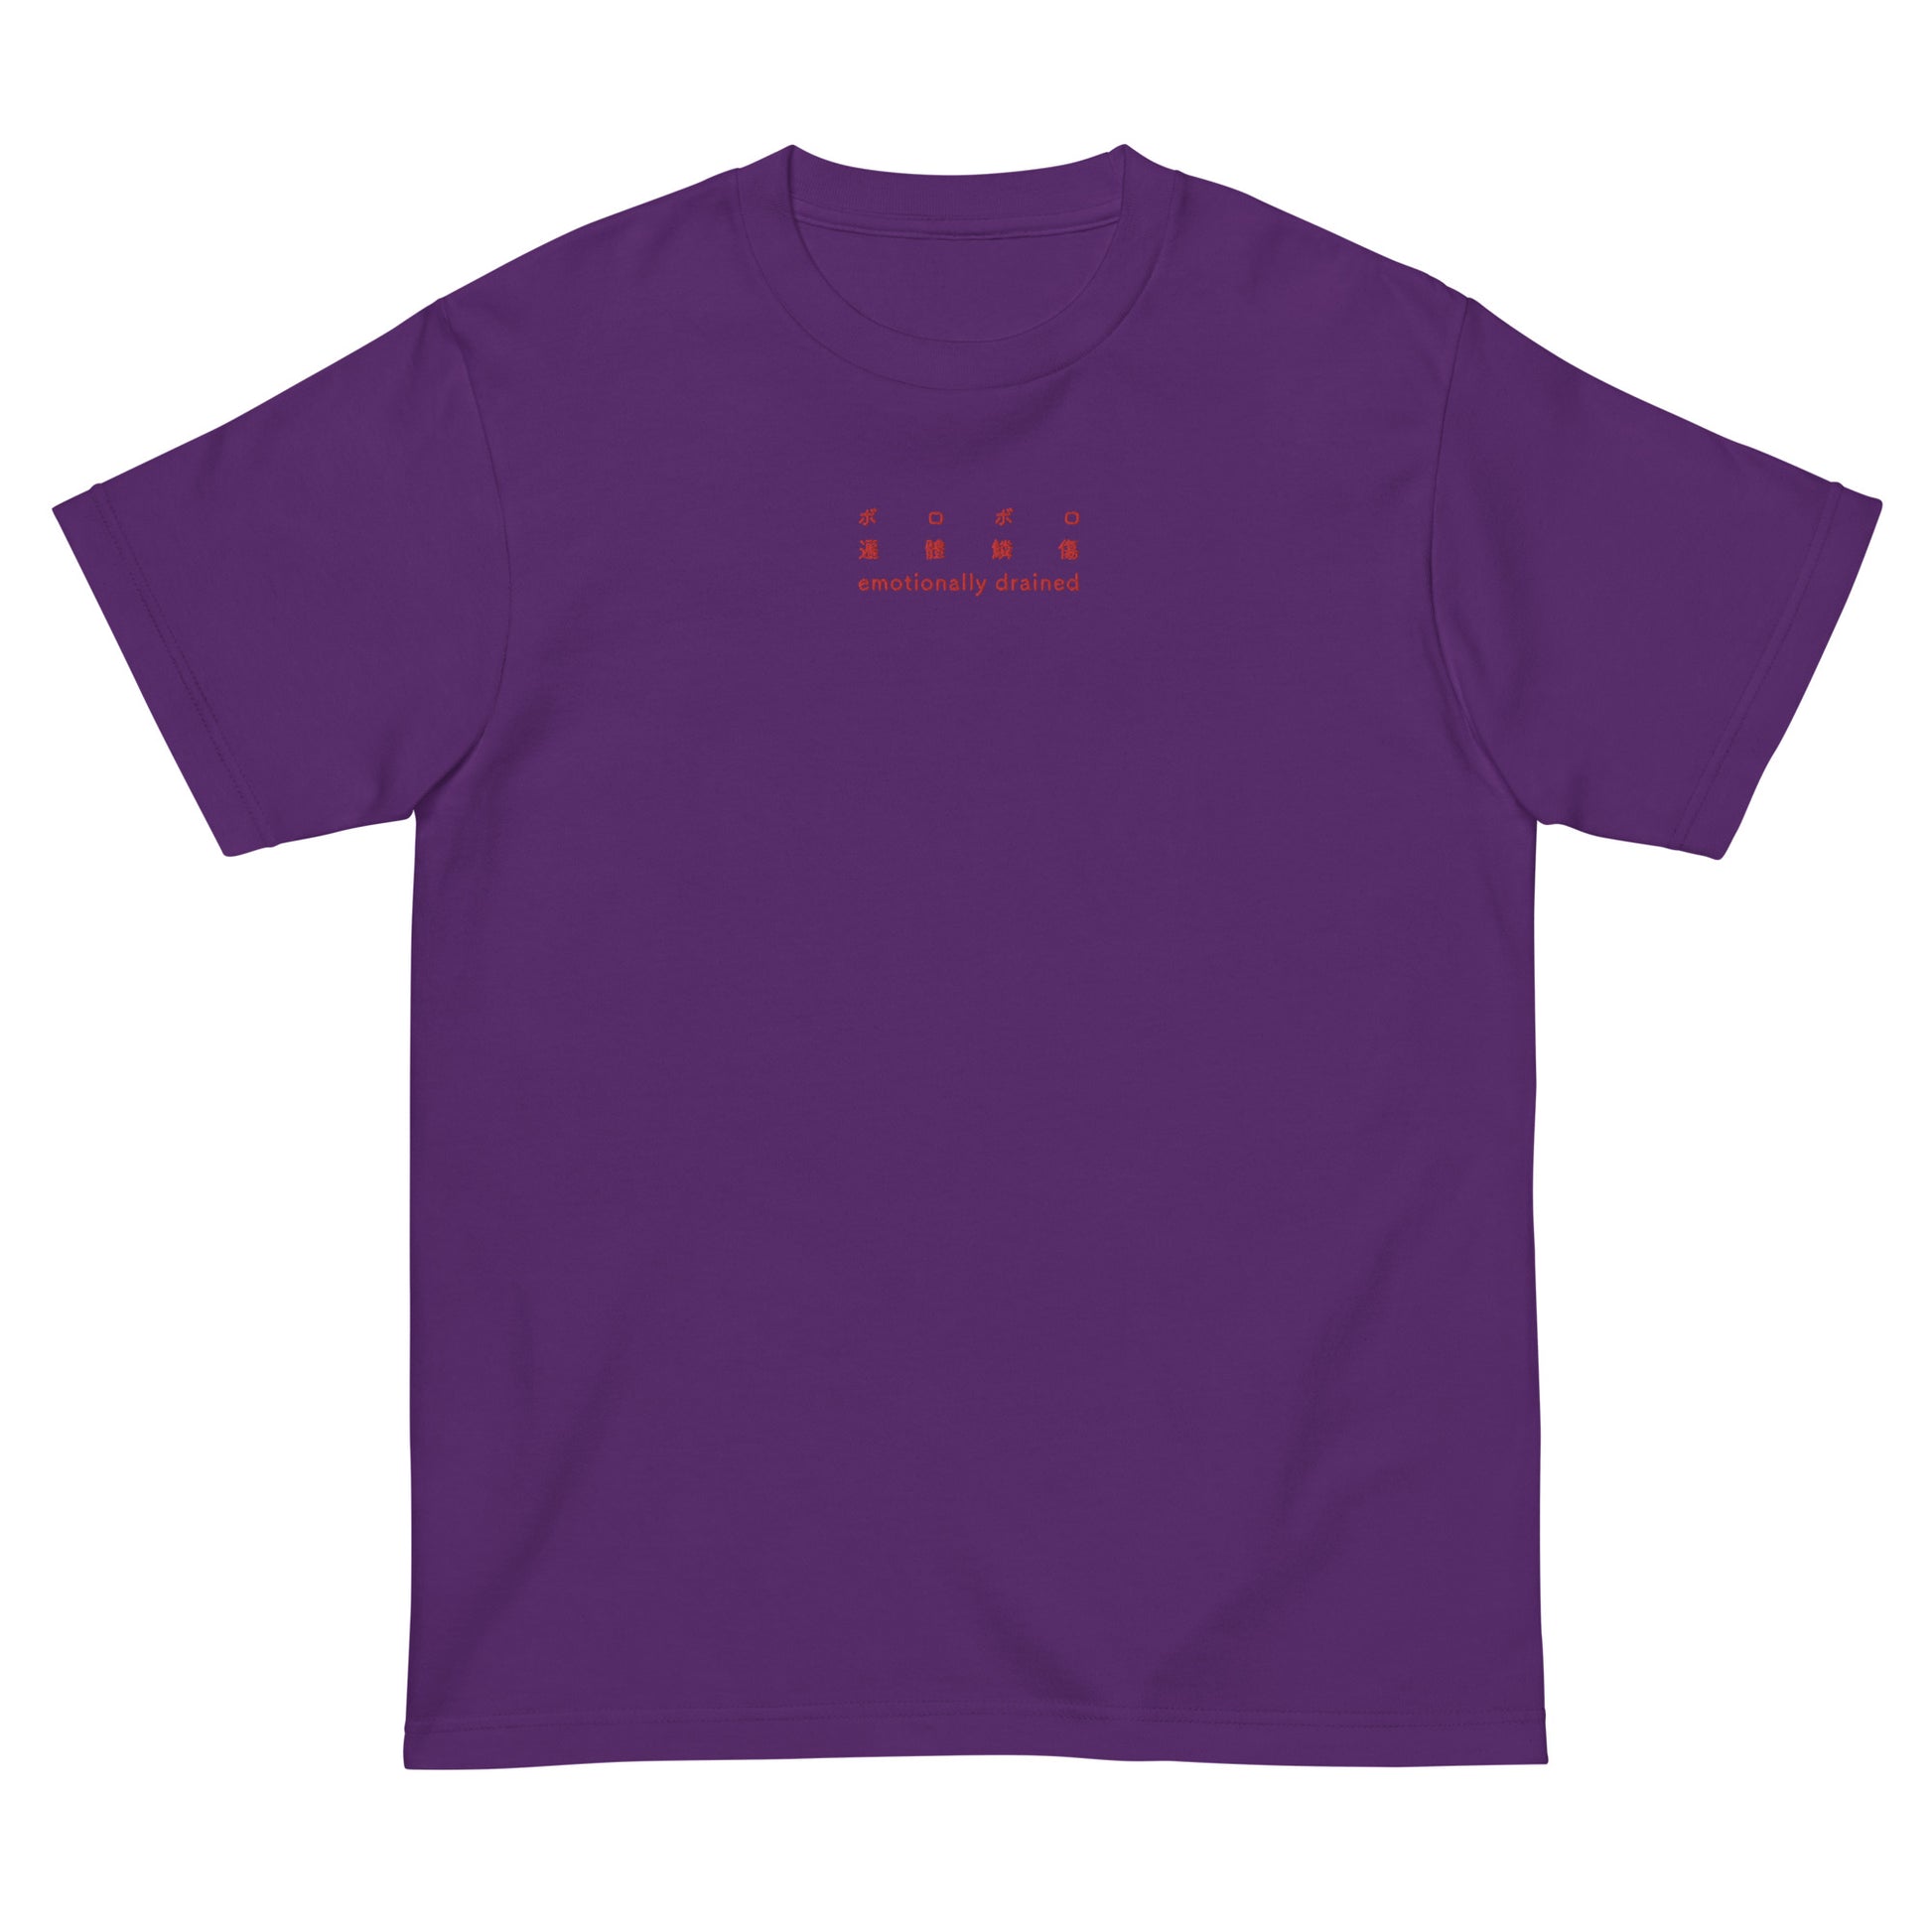 Purple High Quality Tee - Front Design with an Red Embroidery "emotionally drained" in three languages